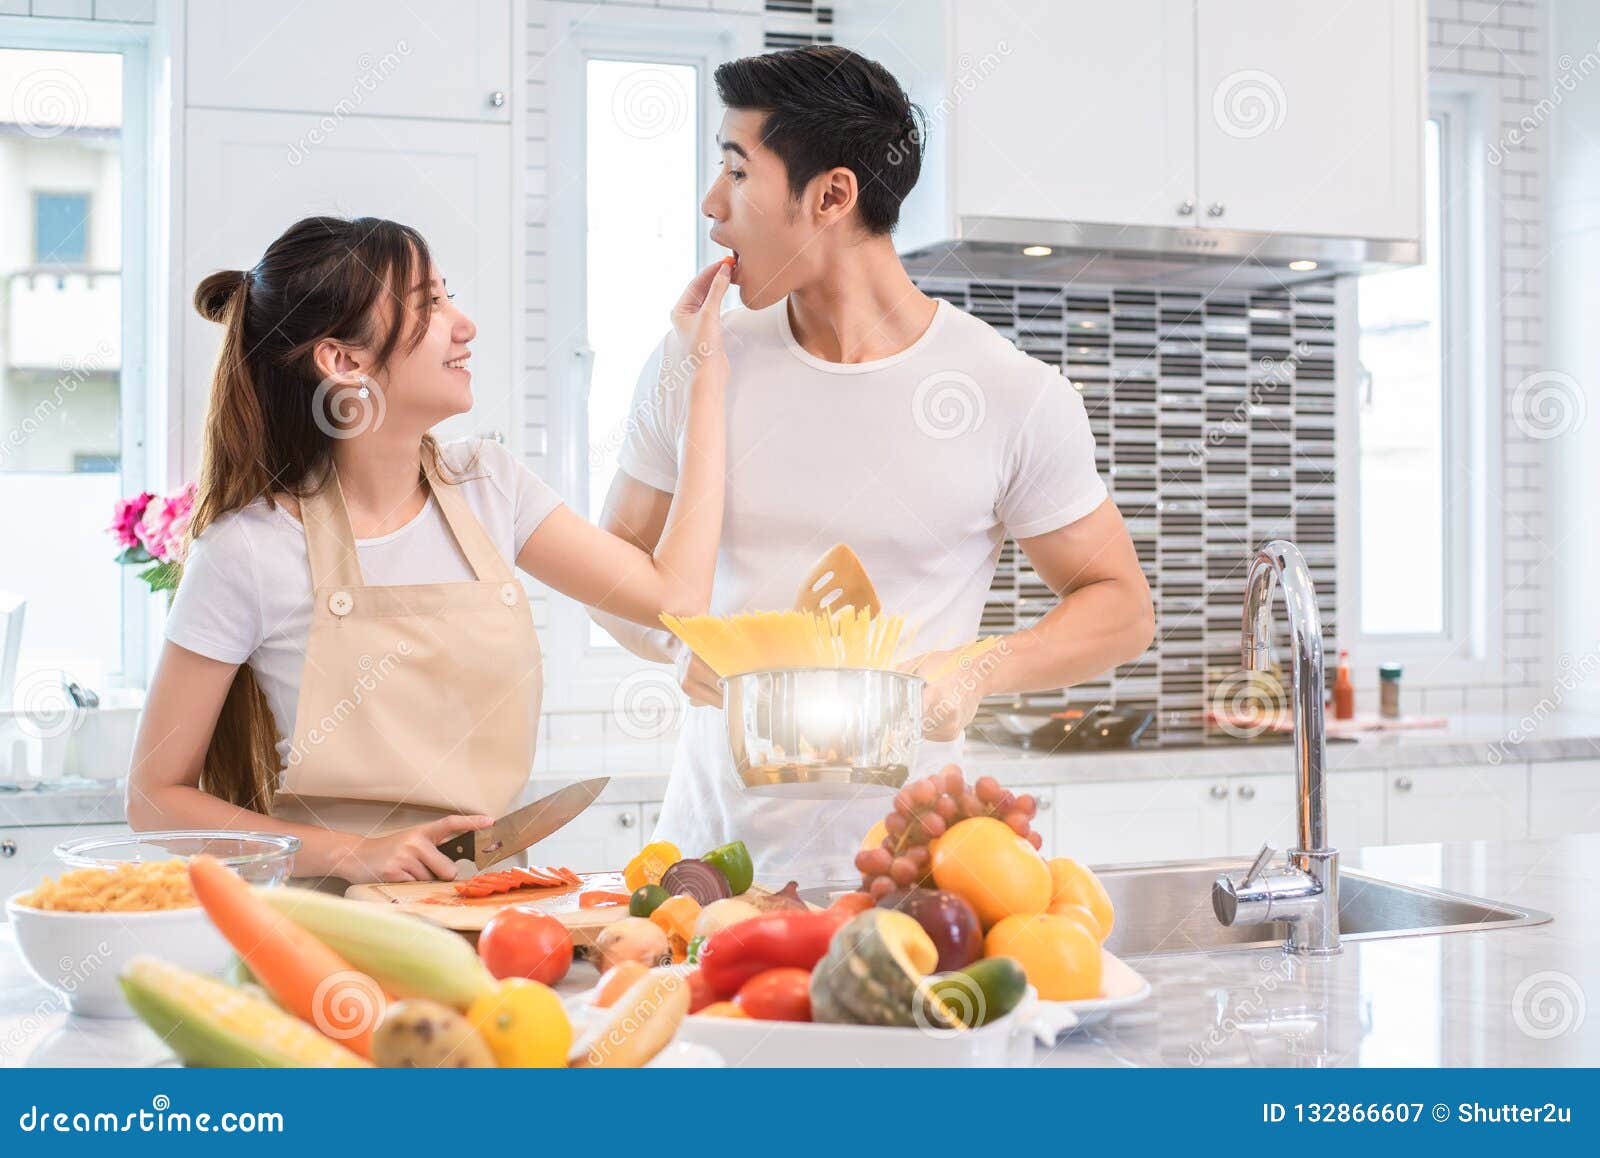 asian couples feeding food together in kitchen. people and lifestyles concept. sweet honeymoon and holidays concept. valentines d